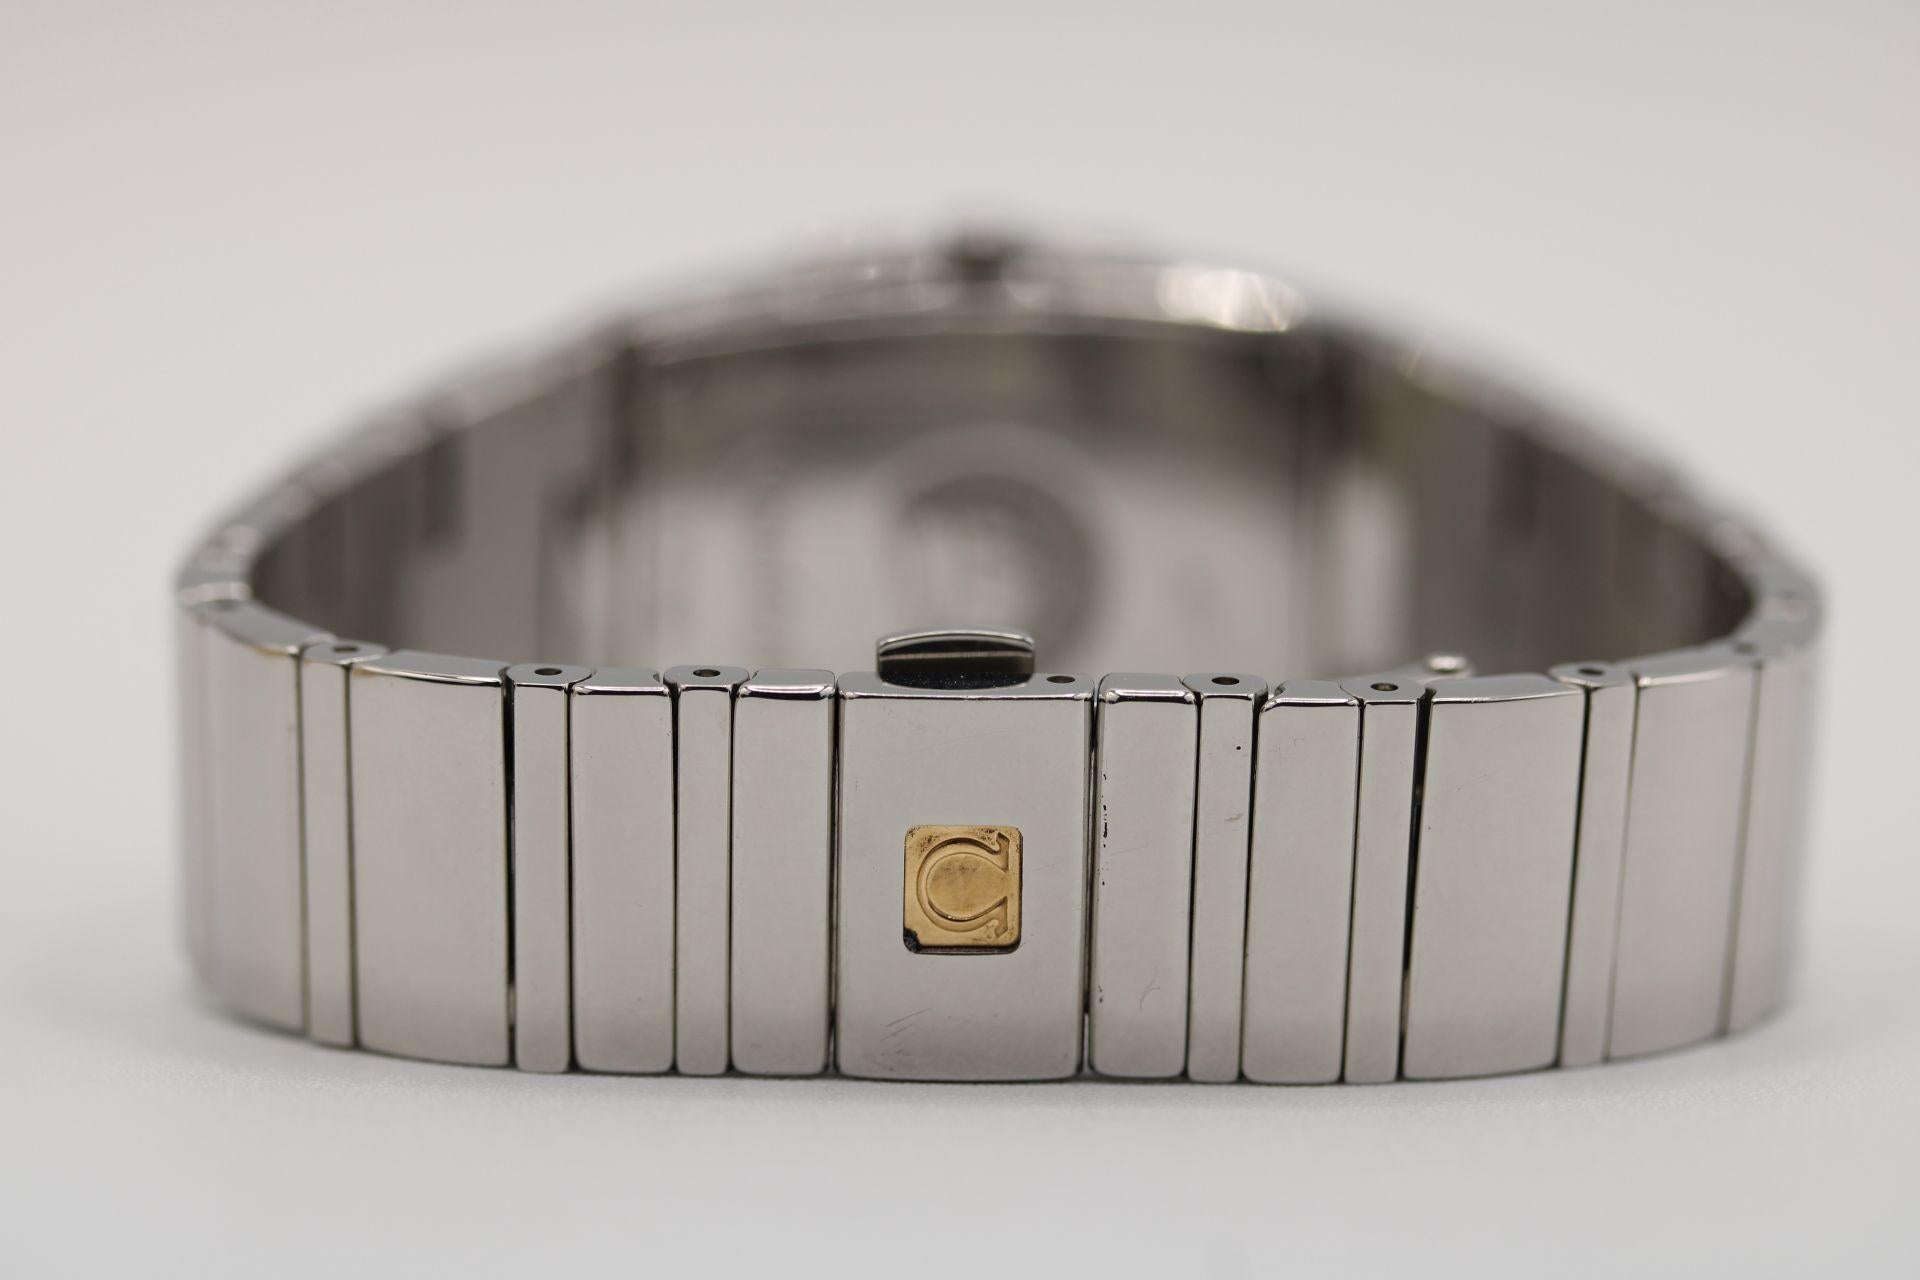 Watch: Constellation Quadrella 1586.70.00 Full Set 1998 (undated)
Stock Number: CHW5078


This fabulous Omega Constellation is presented as a complete full set having had a recent polish and a battery change. The watch is offered with inner and